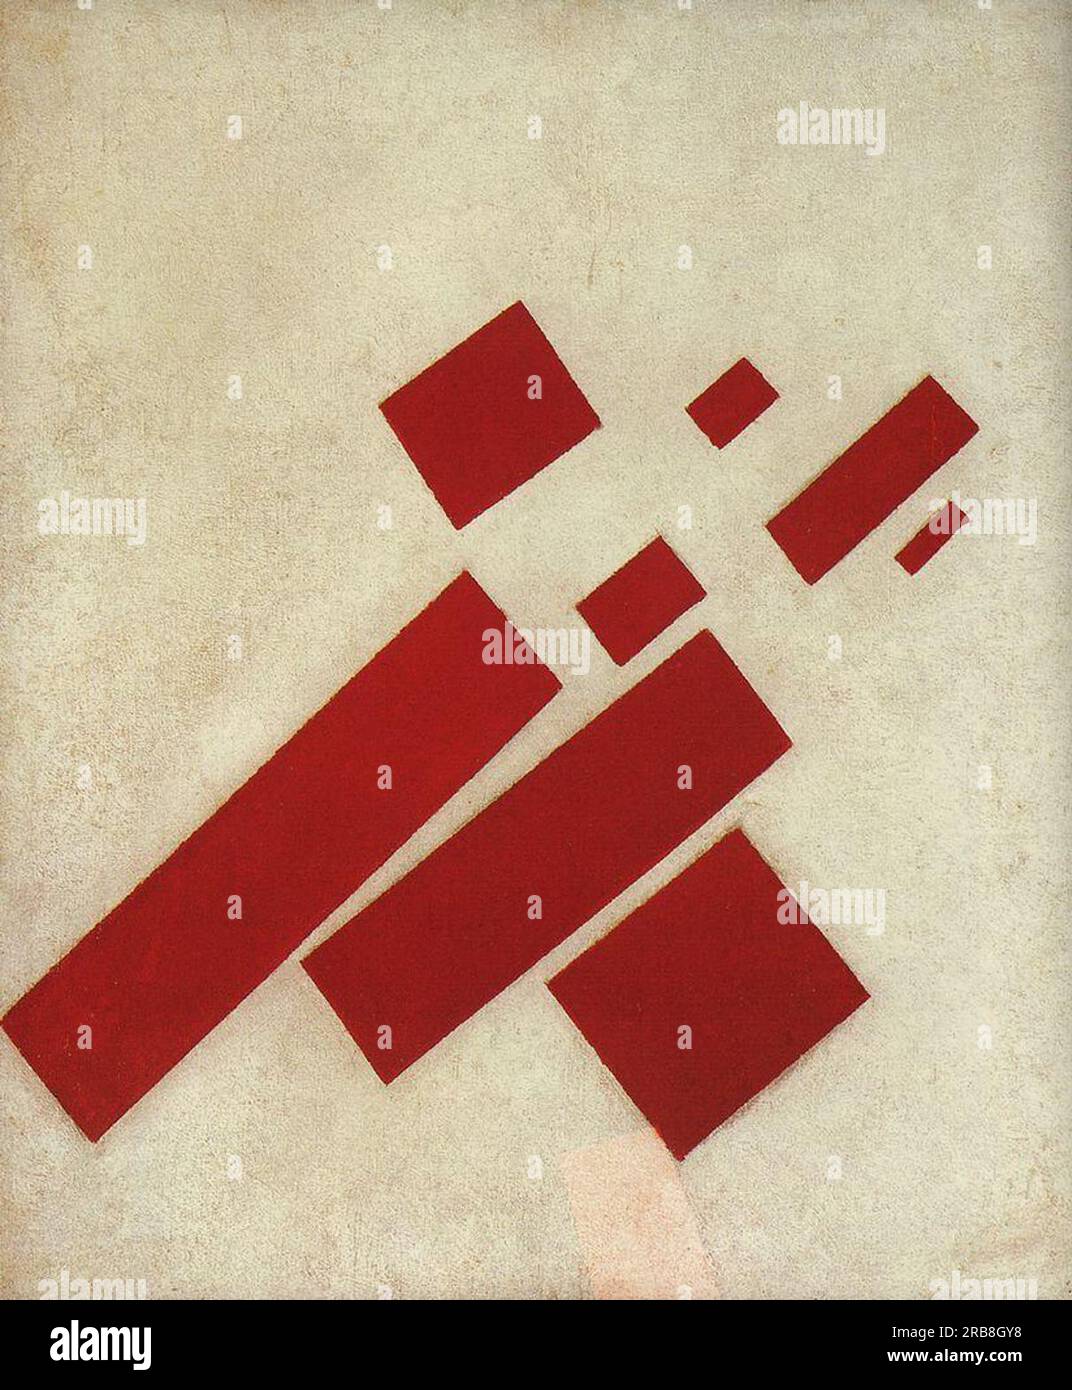 Suprematism with Eight Red Rectangles 1915 by Kazimir Malevich Stock Photo